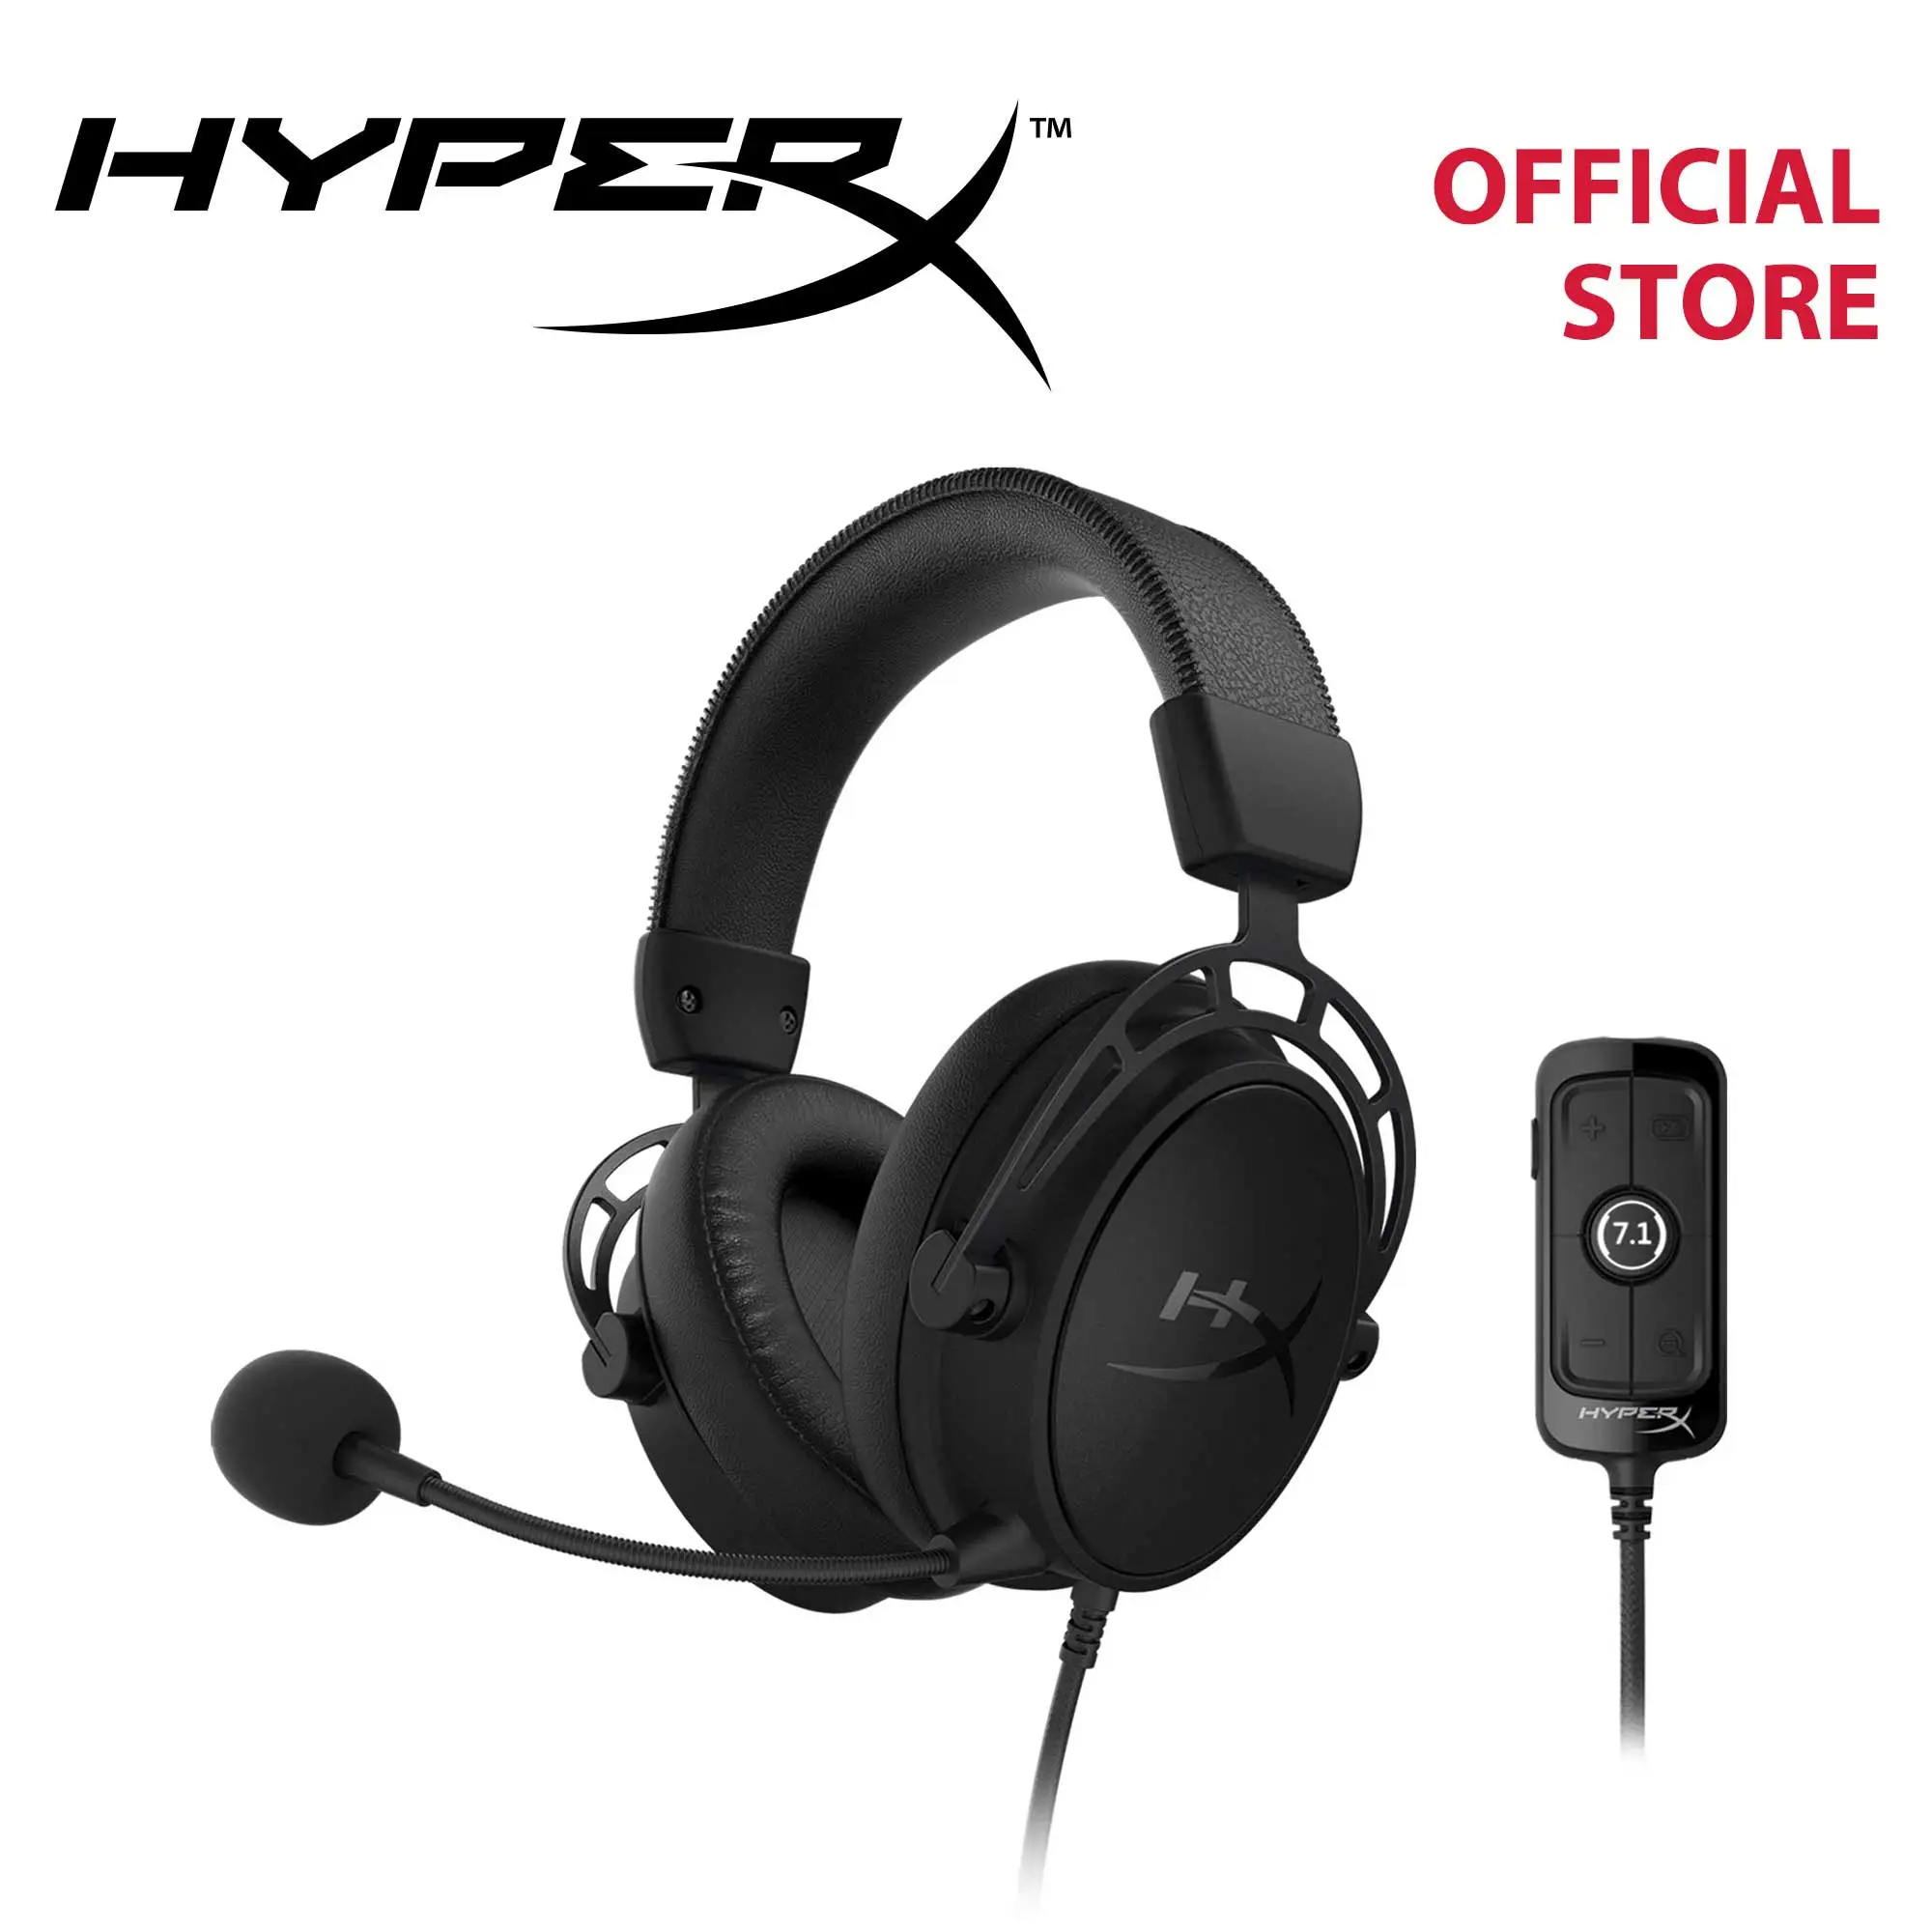 

HyperX Cloud Alpha S USB Gaming Headset with 7.1 Surround Sound for PC (HX-HSCAS-BK/WW/4P5L2AA)